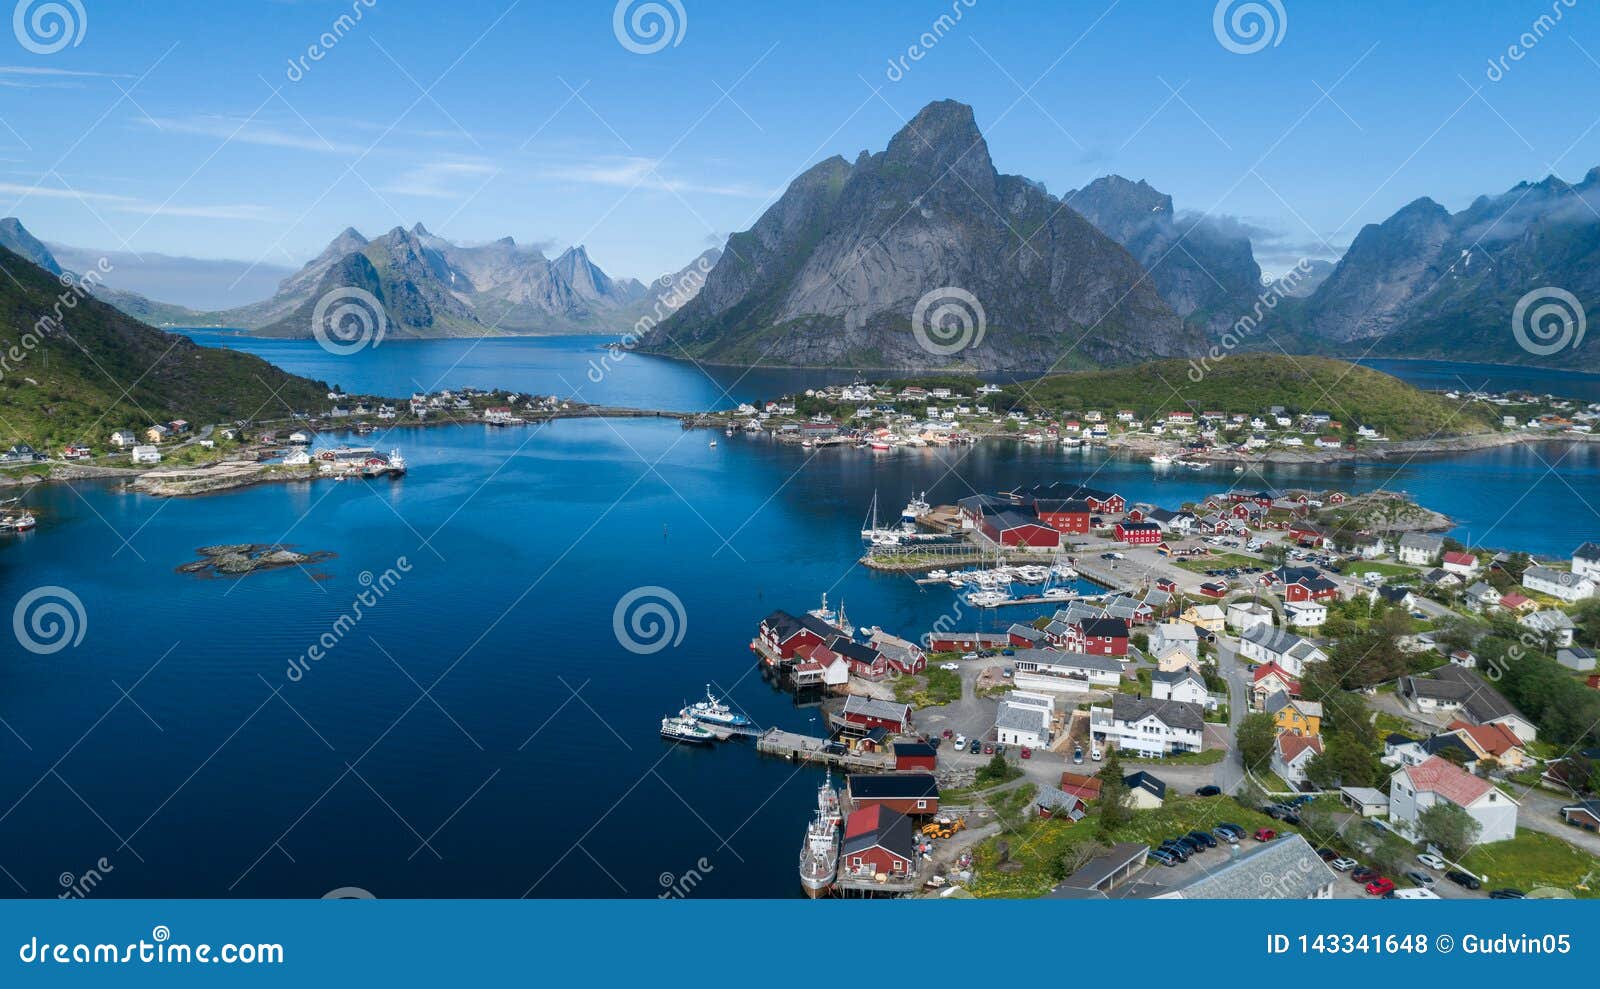 beautiful summer aerial view of reine, norway, lofoten islands, with skyline, mountains, famous fishing village with red fishing c